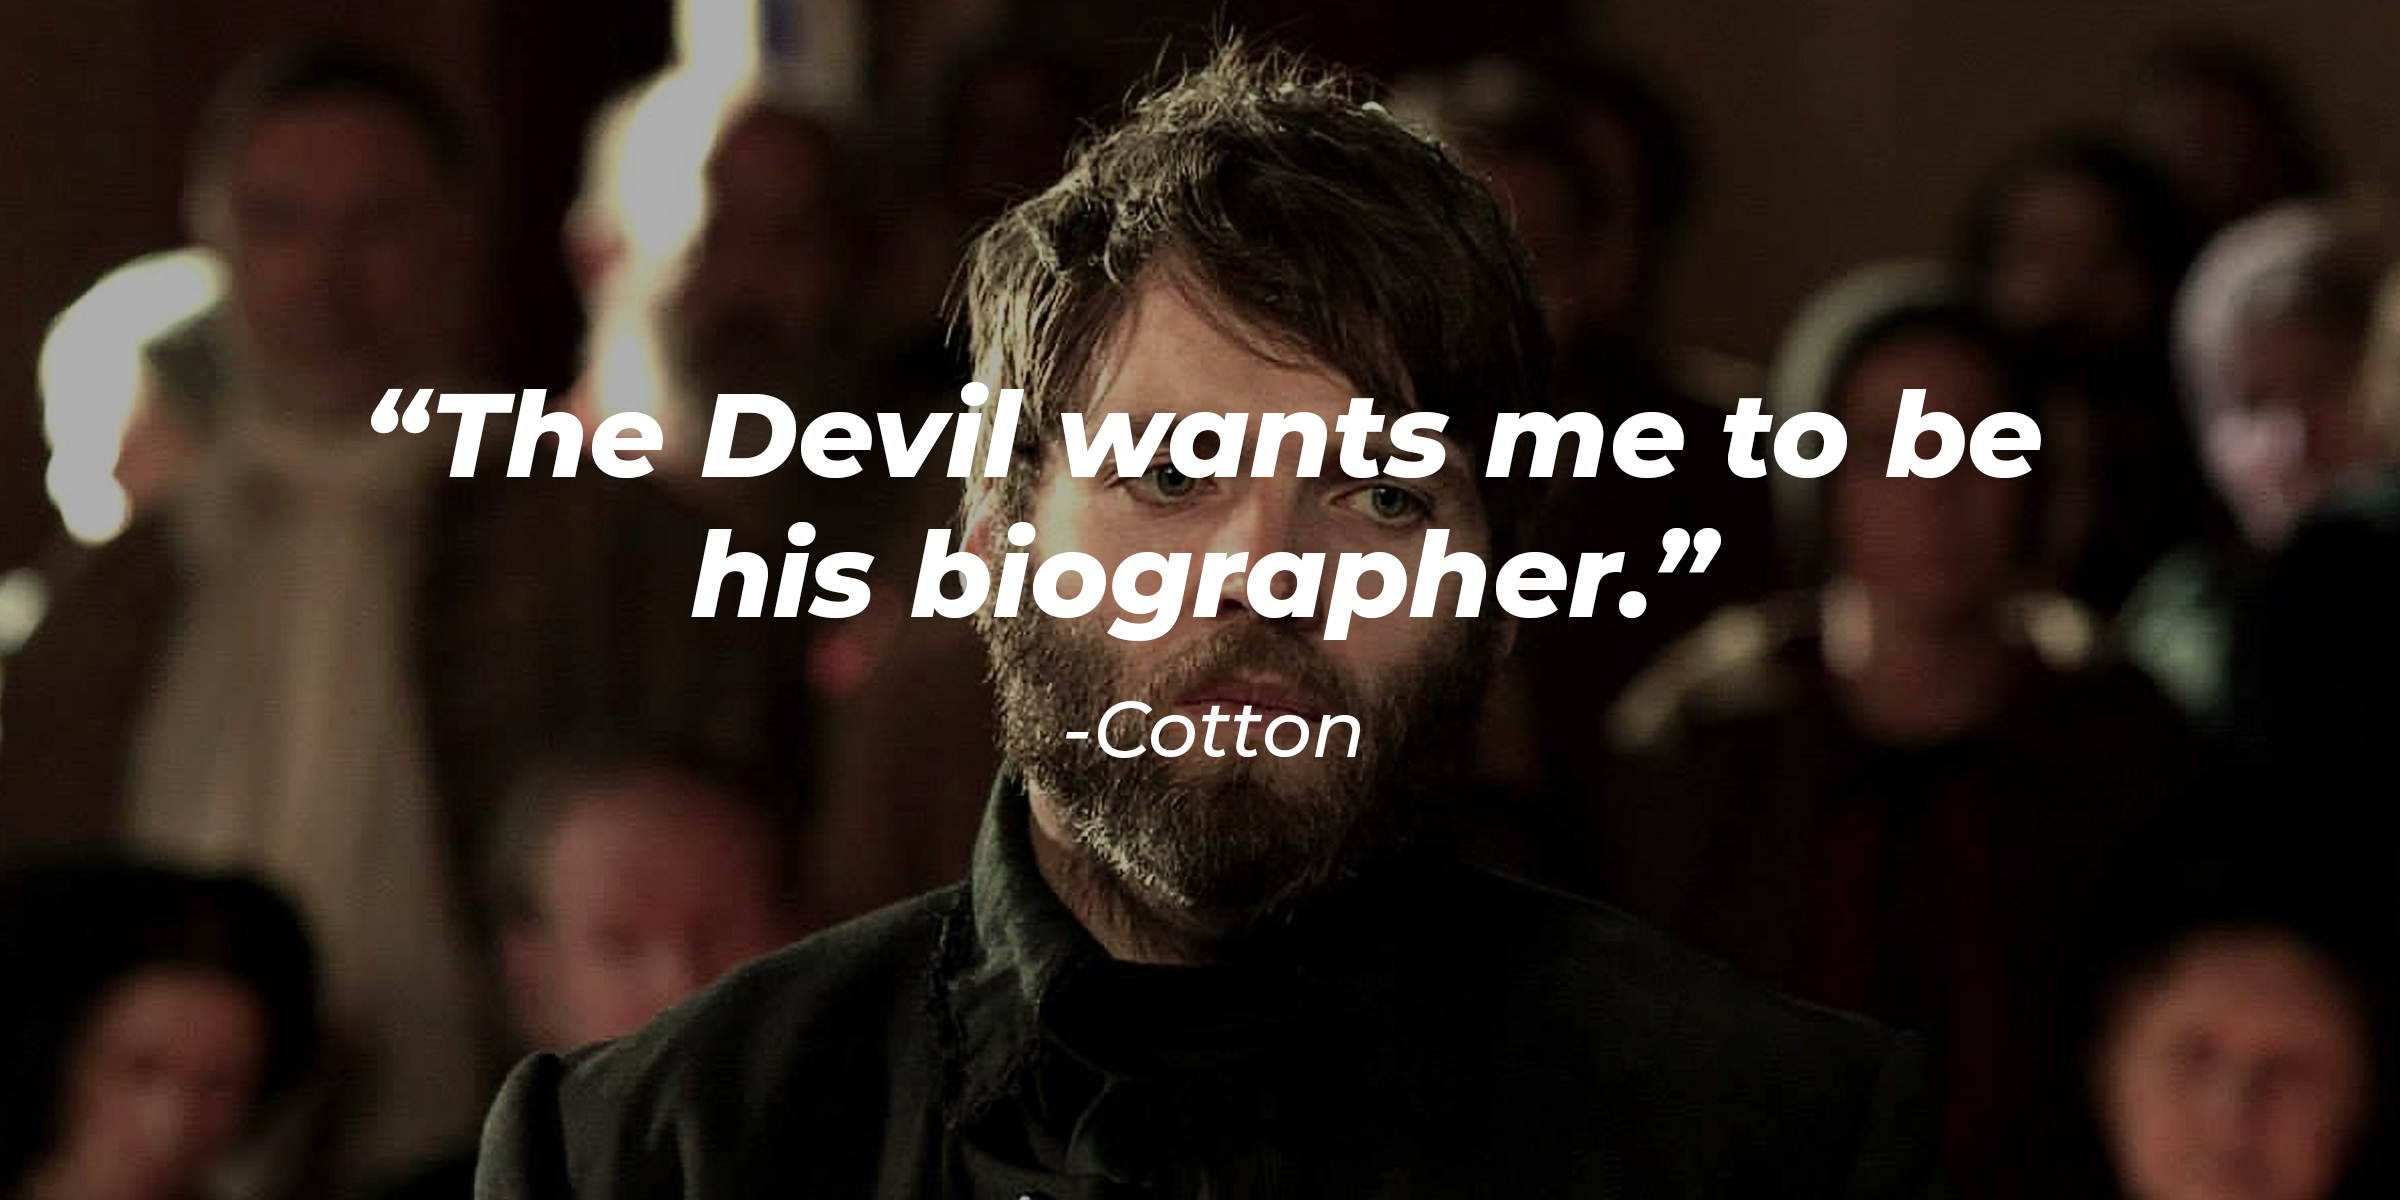 Cotton's quote: "The Devil wants me to be his biographer." | Source: Facebook/Salem-TV-Series